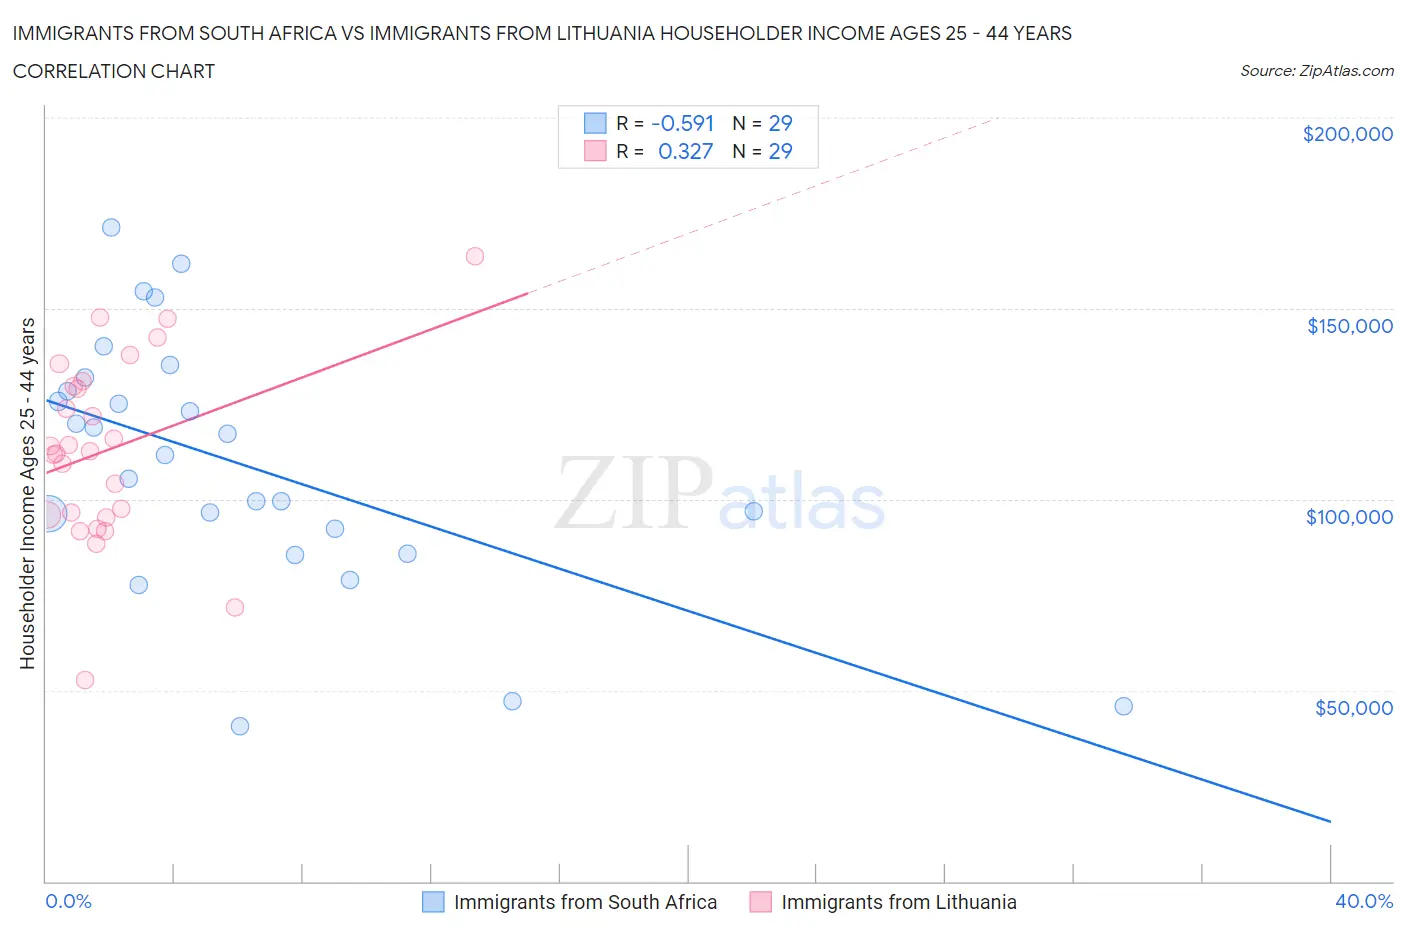 Immigrants from South Africa vs Immigrants from Lithuania Householder Income Ages 25 - 44 years